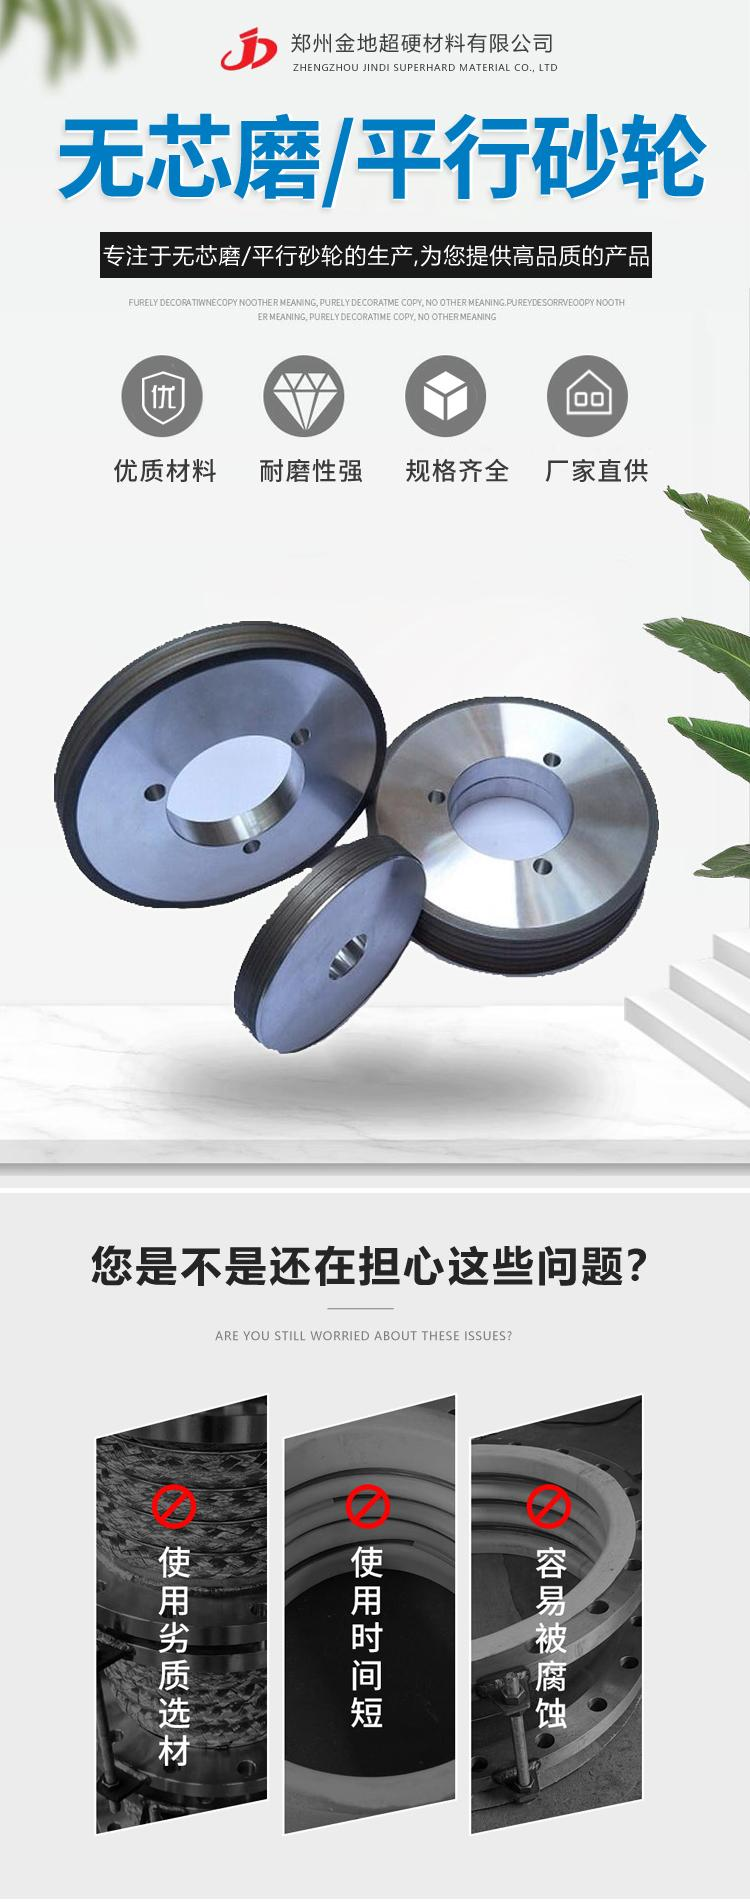 Diamond grinding wheel grinding hard alloy saw blades with good self sharpening performance Cup shaped bowl shaped grinding wheel